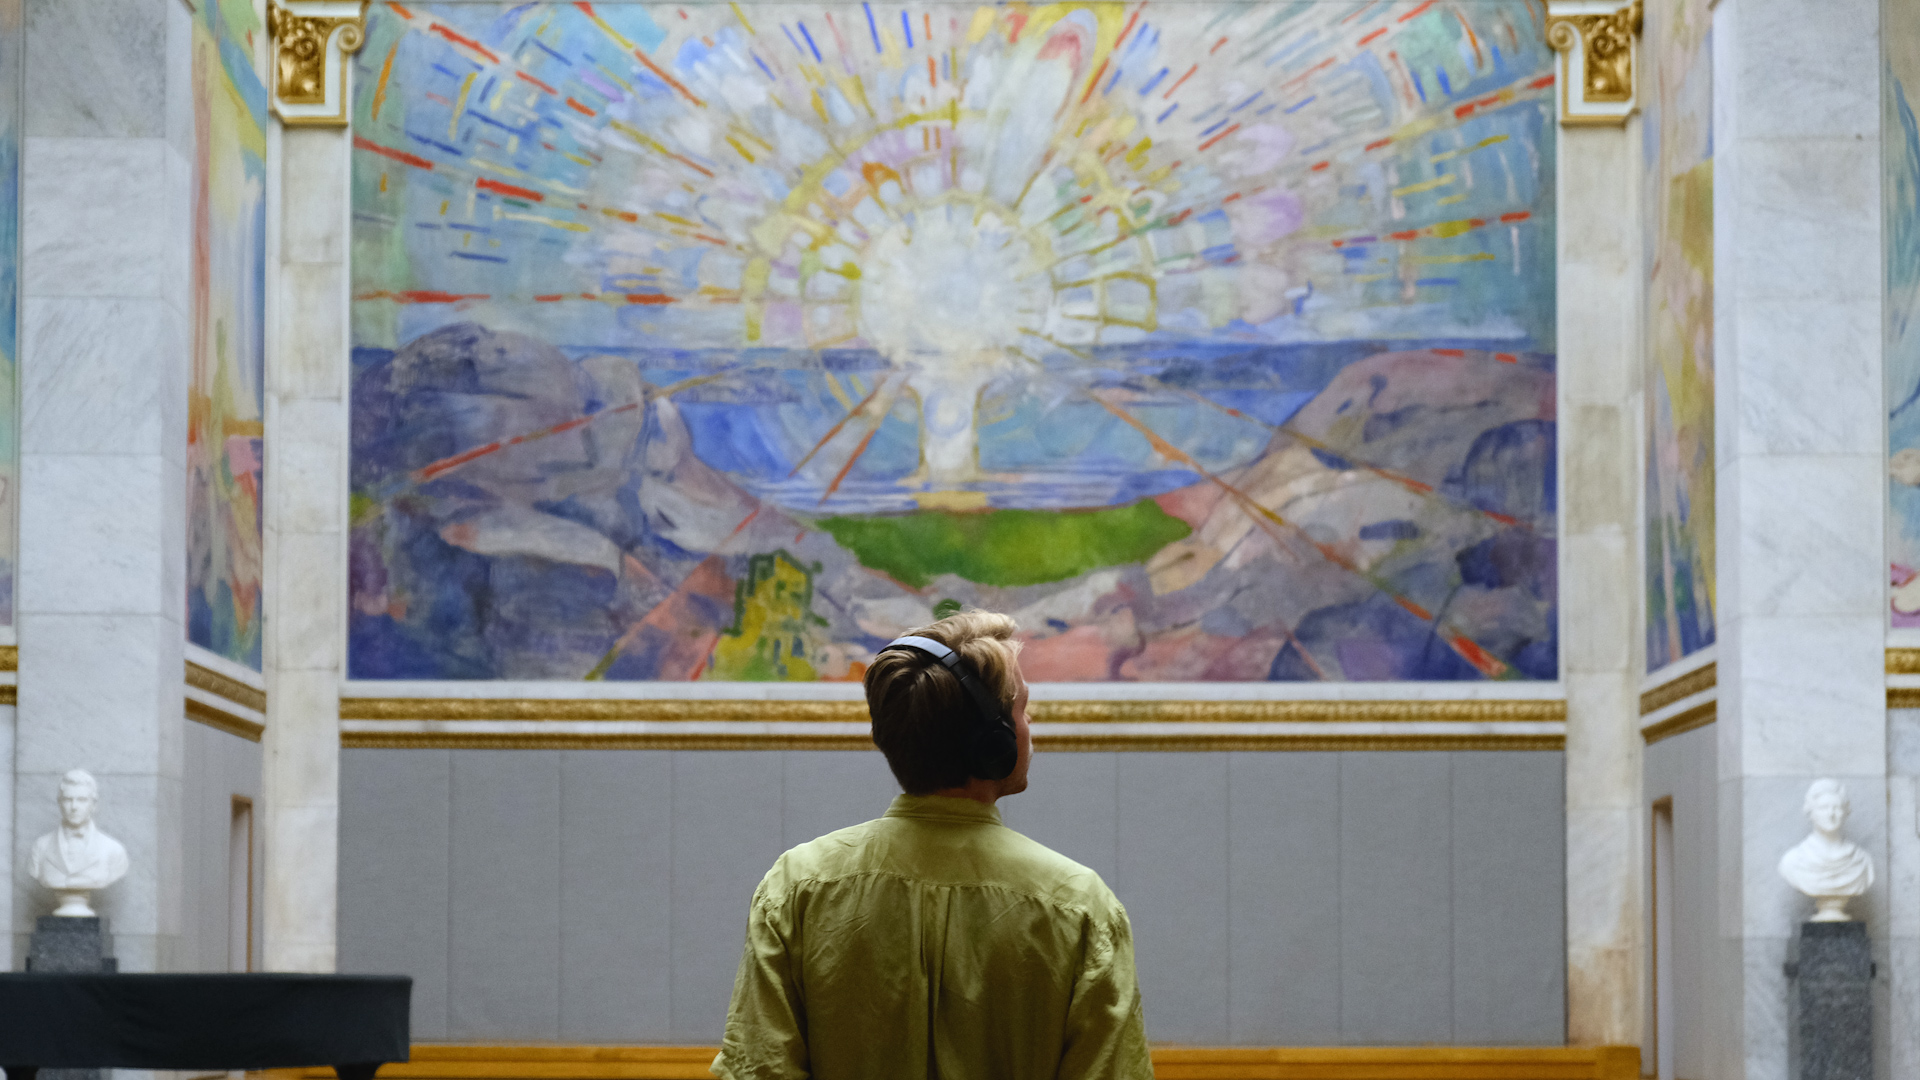 Man in a green shirt in the foreground, wearing a headset. In the background we see Edvard Munch's painting "The Sun" hanging in the University's Aula.